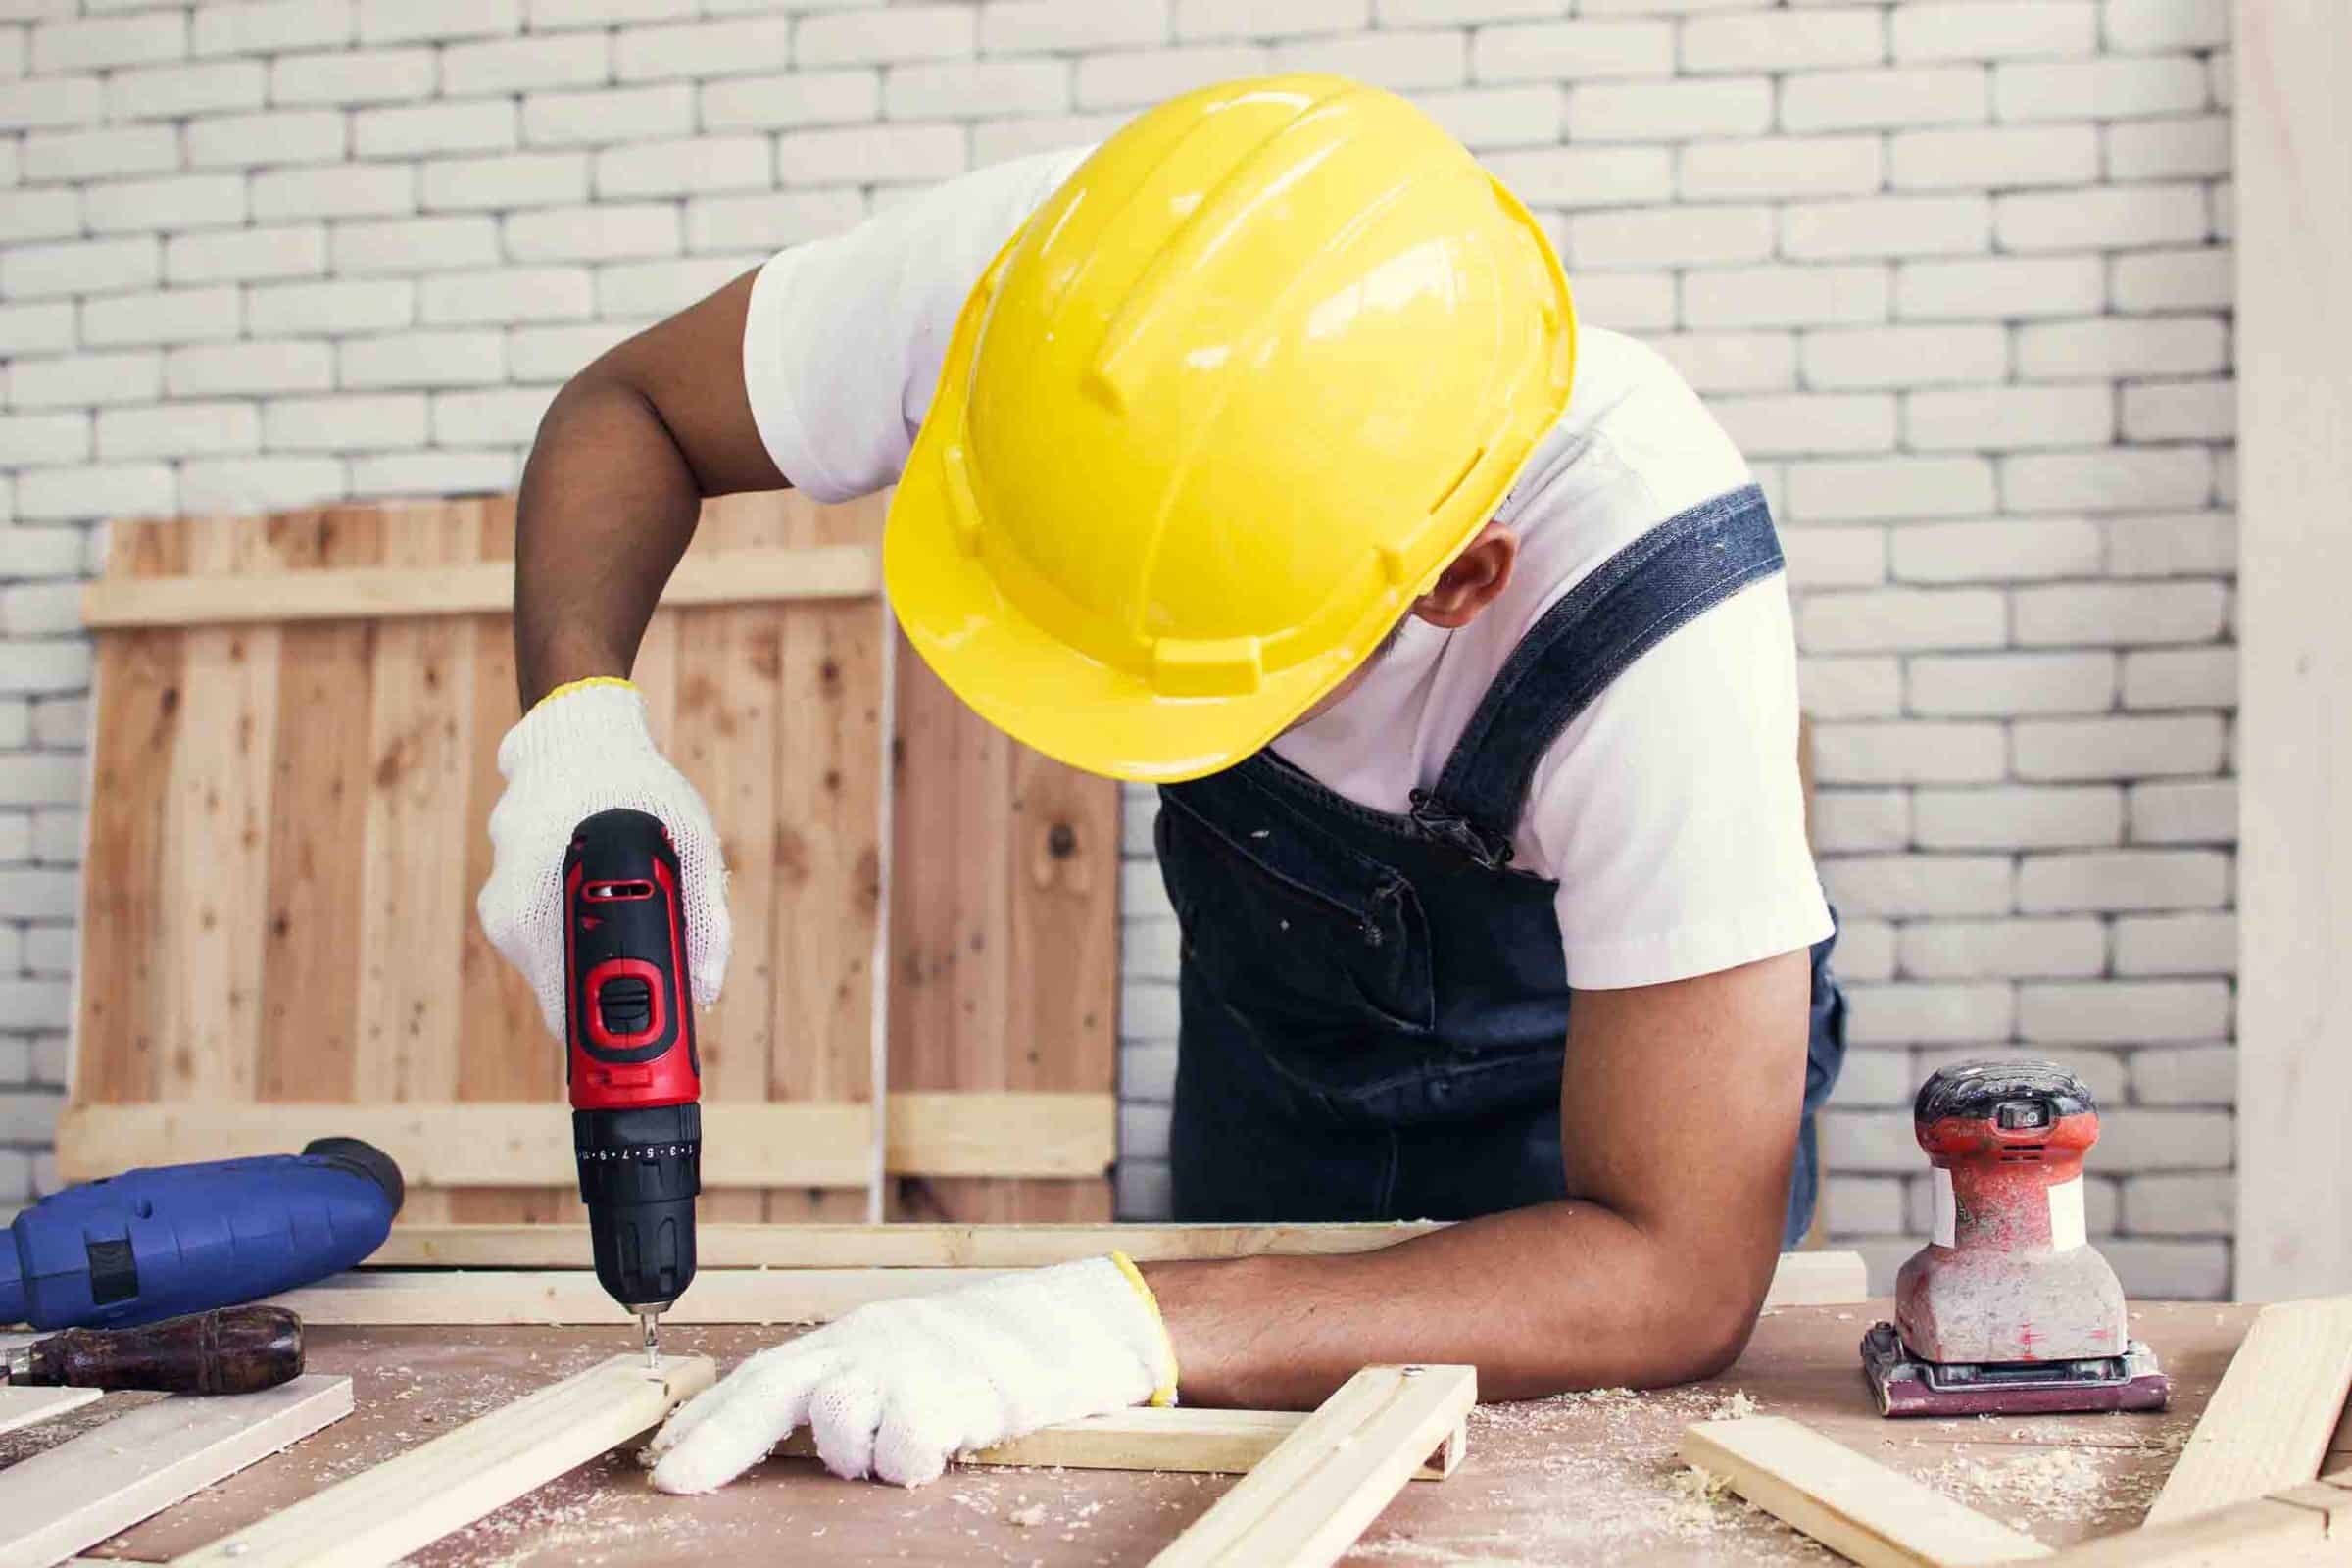 Construction worker drilling into wood